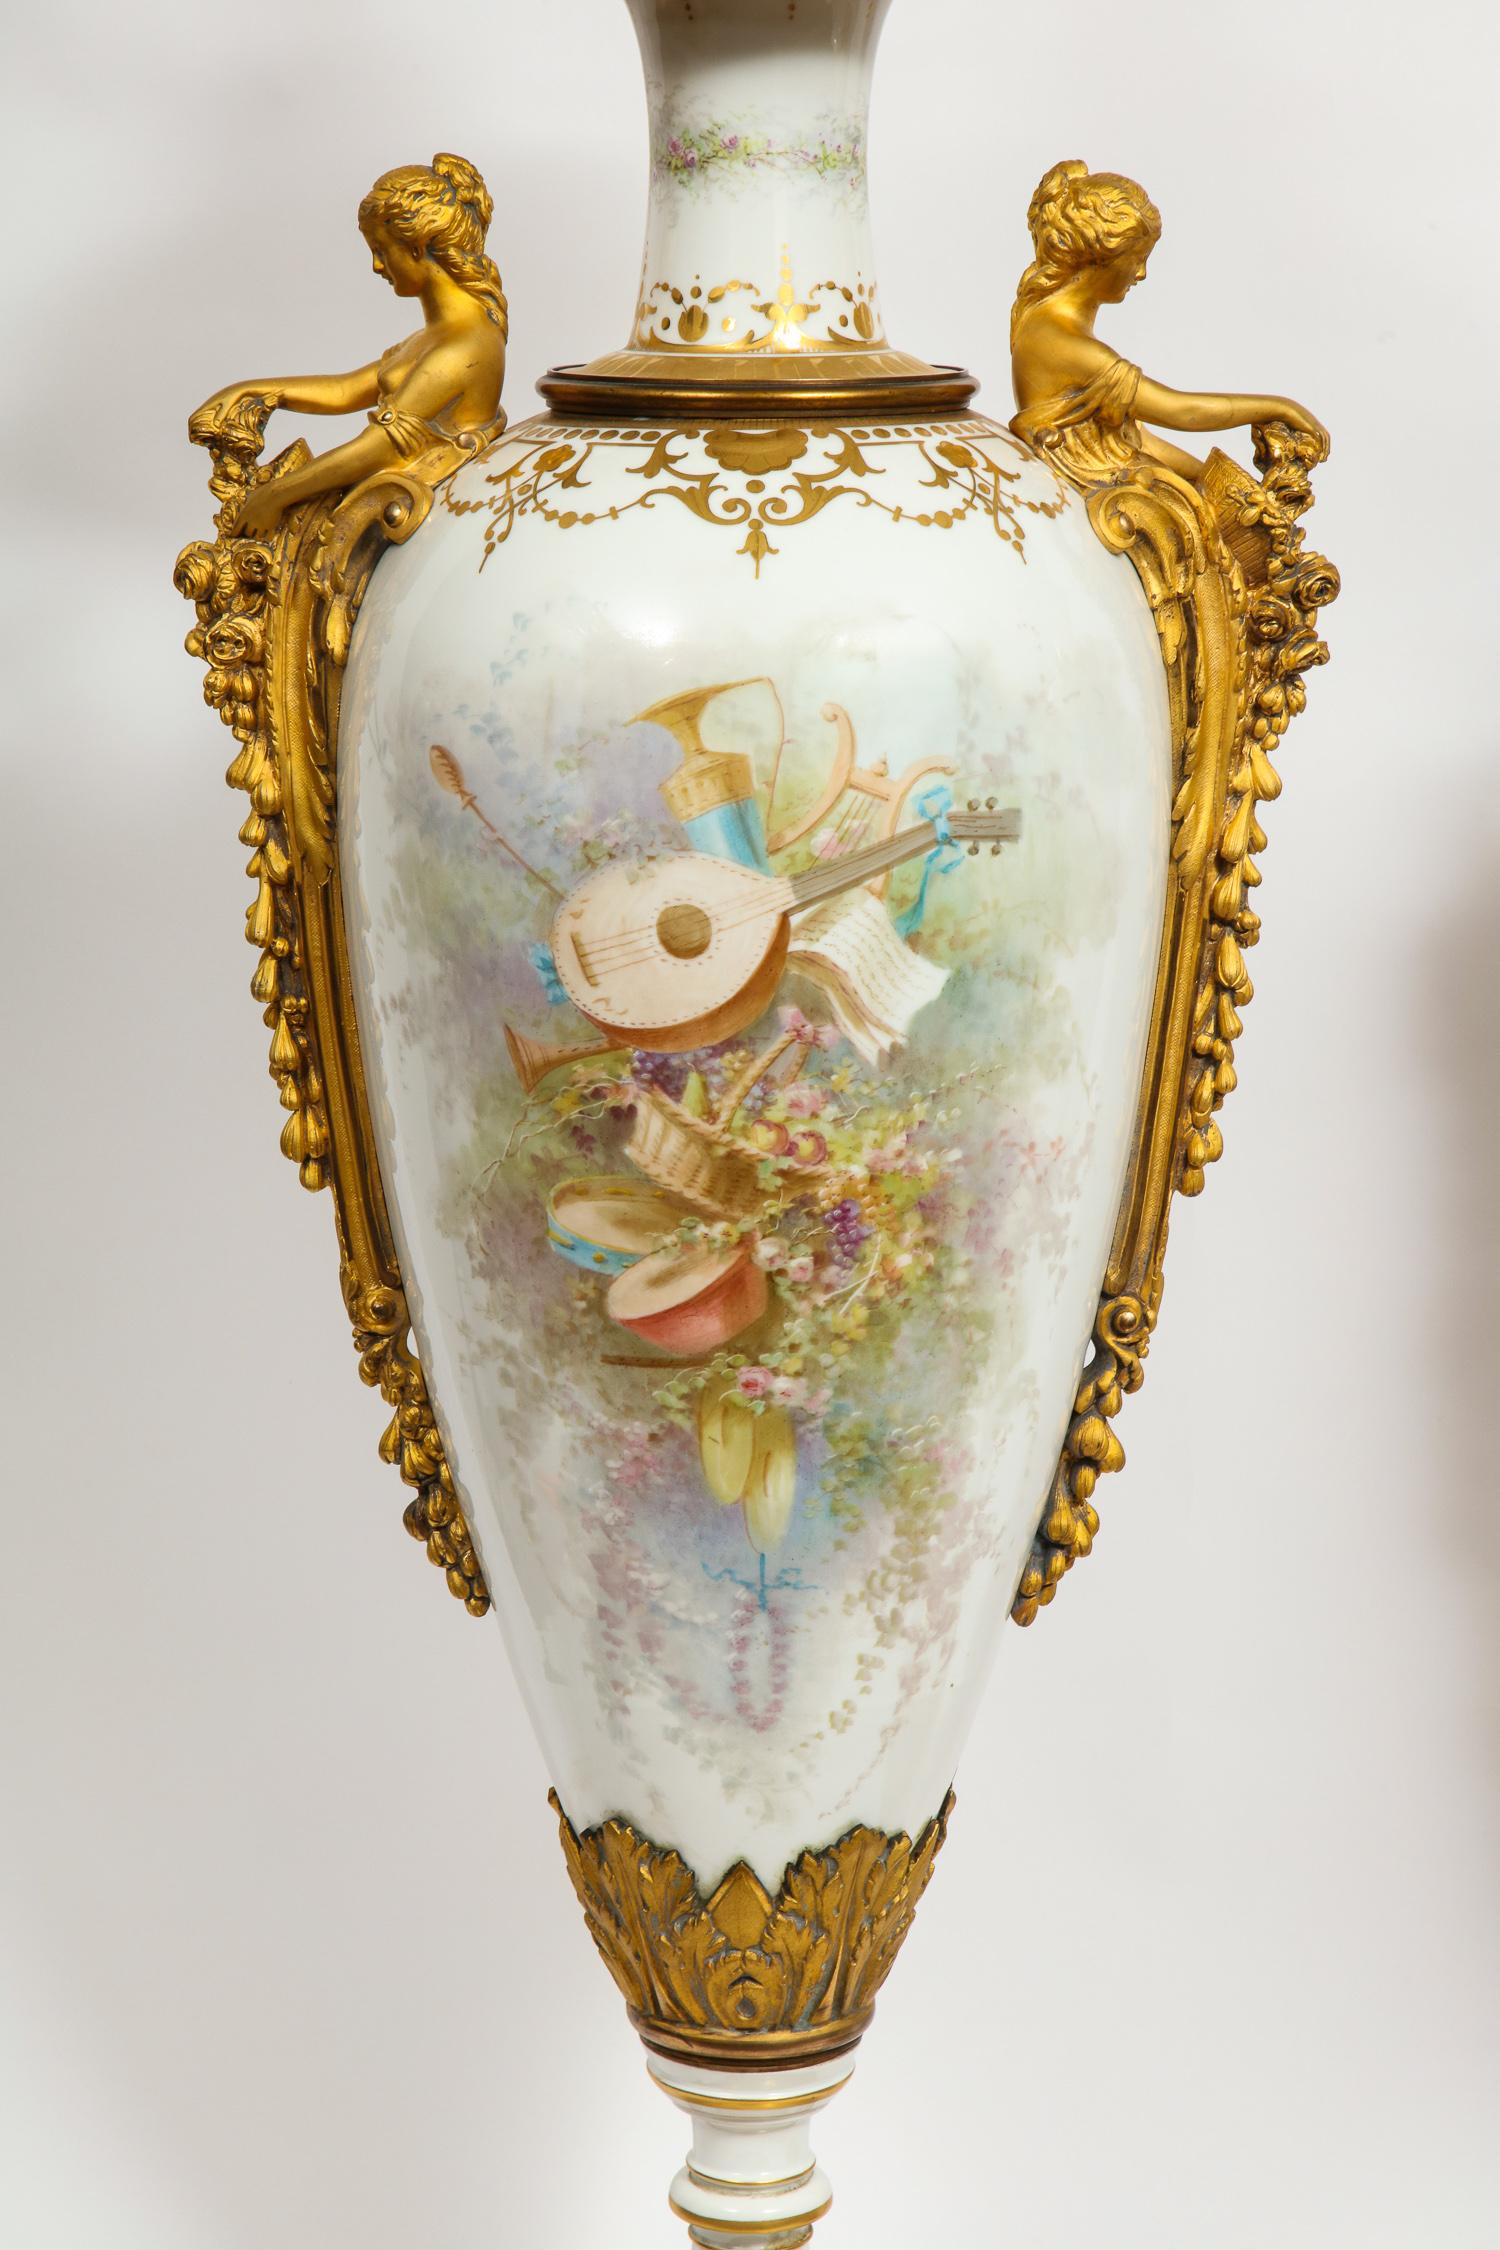 Monumental Pair of French Ormolu-Mounted White Sèvres Porcelain Vases and Covers 7